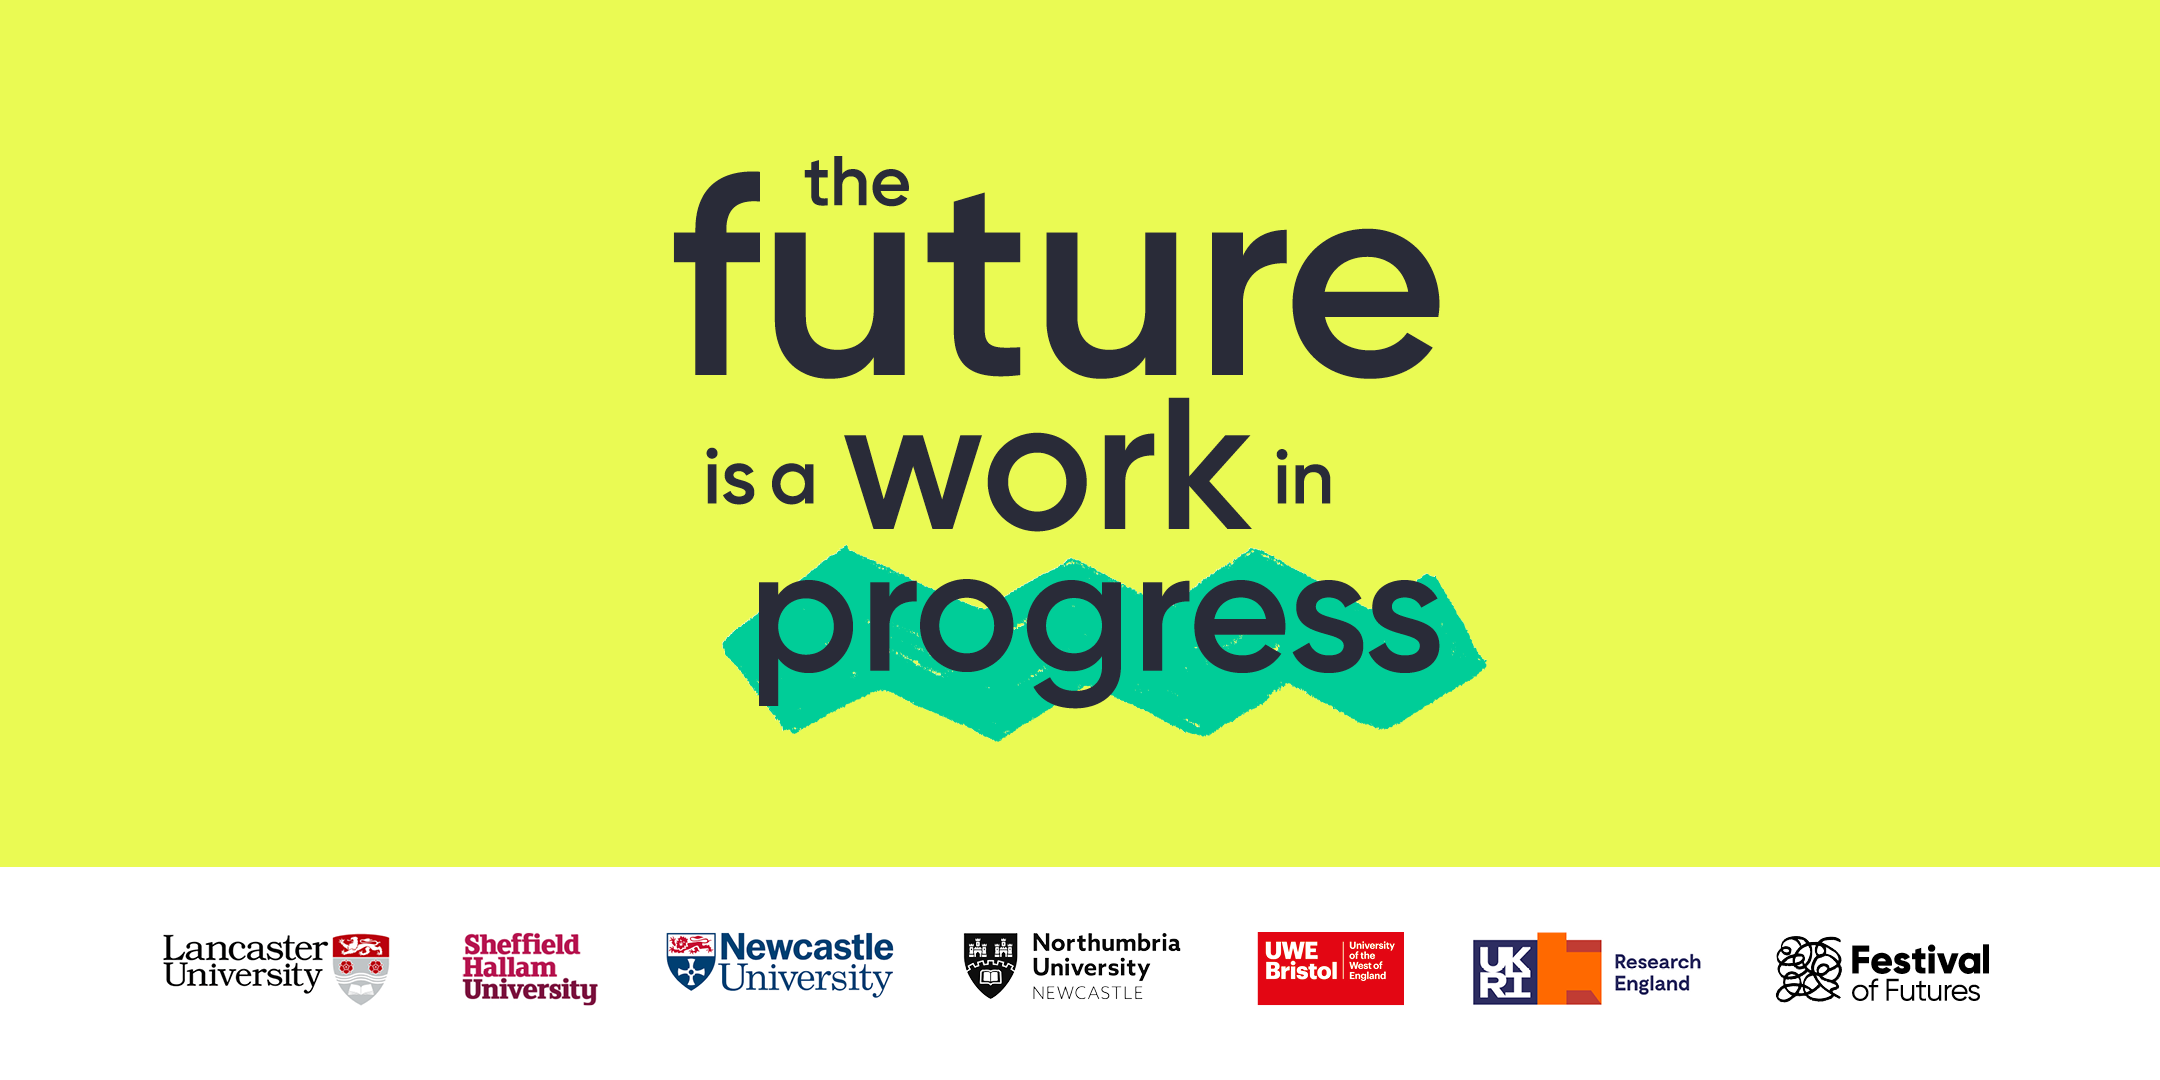 The future is a work in progress banner